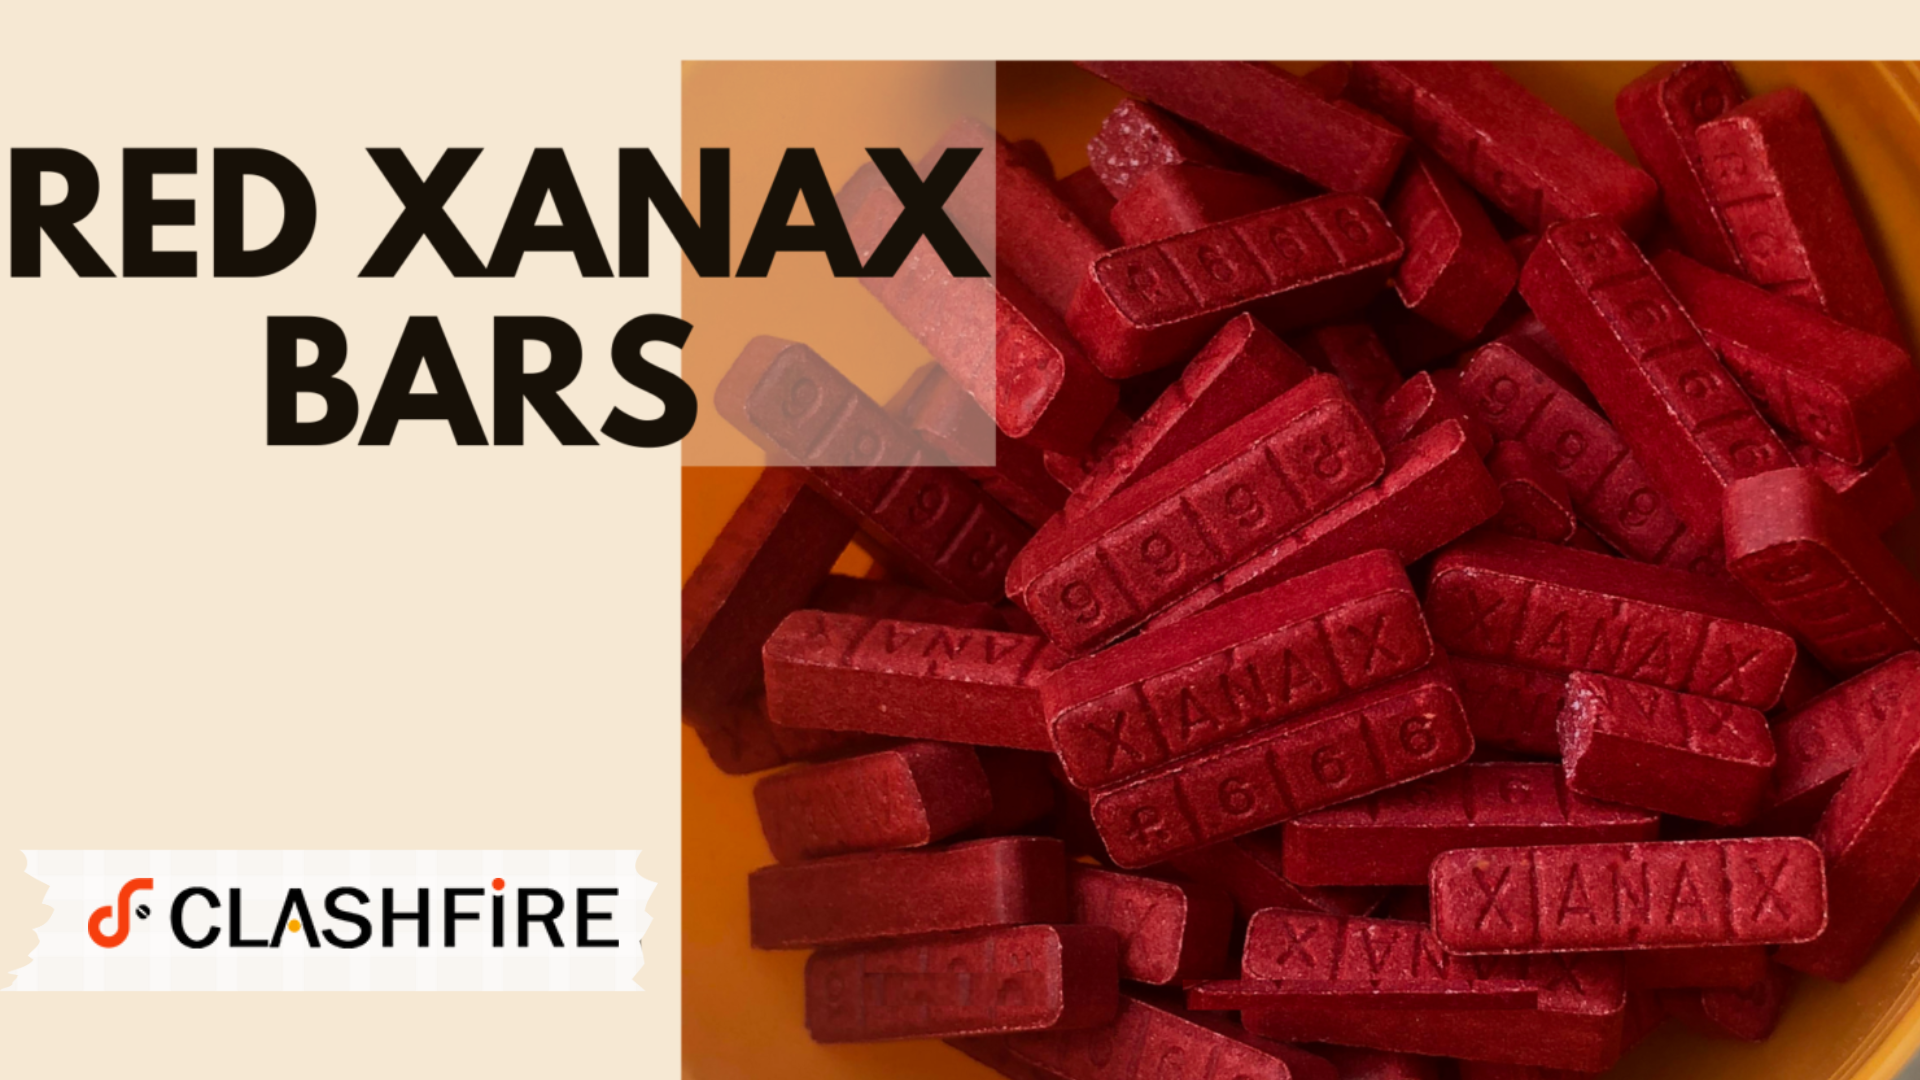 Know About Red Xanax Bars and There Uses 4